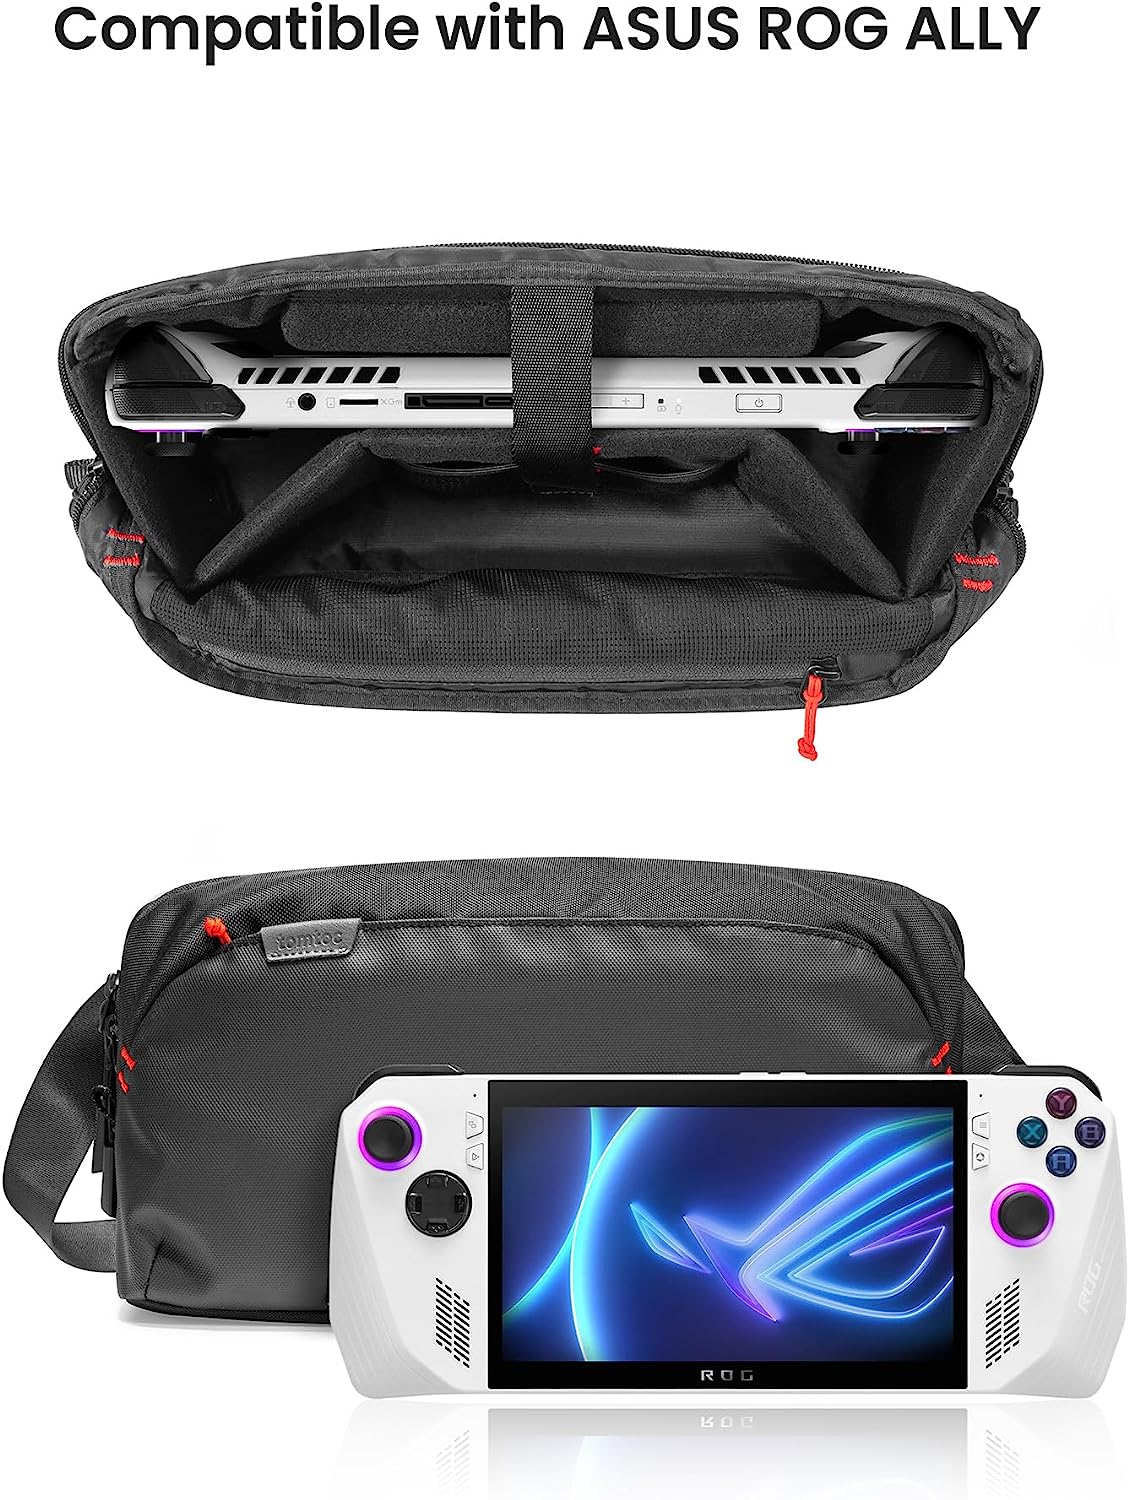 JSAUX ROG Ally Carrying Case To Protect Your ROG Ally